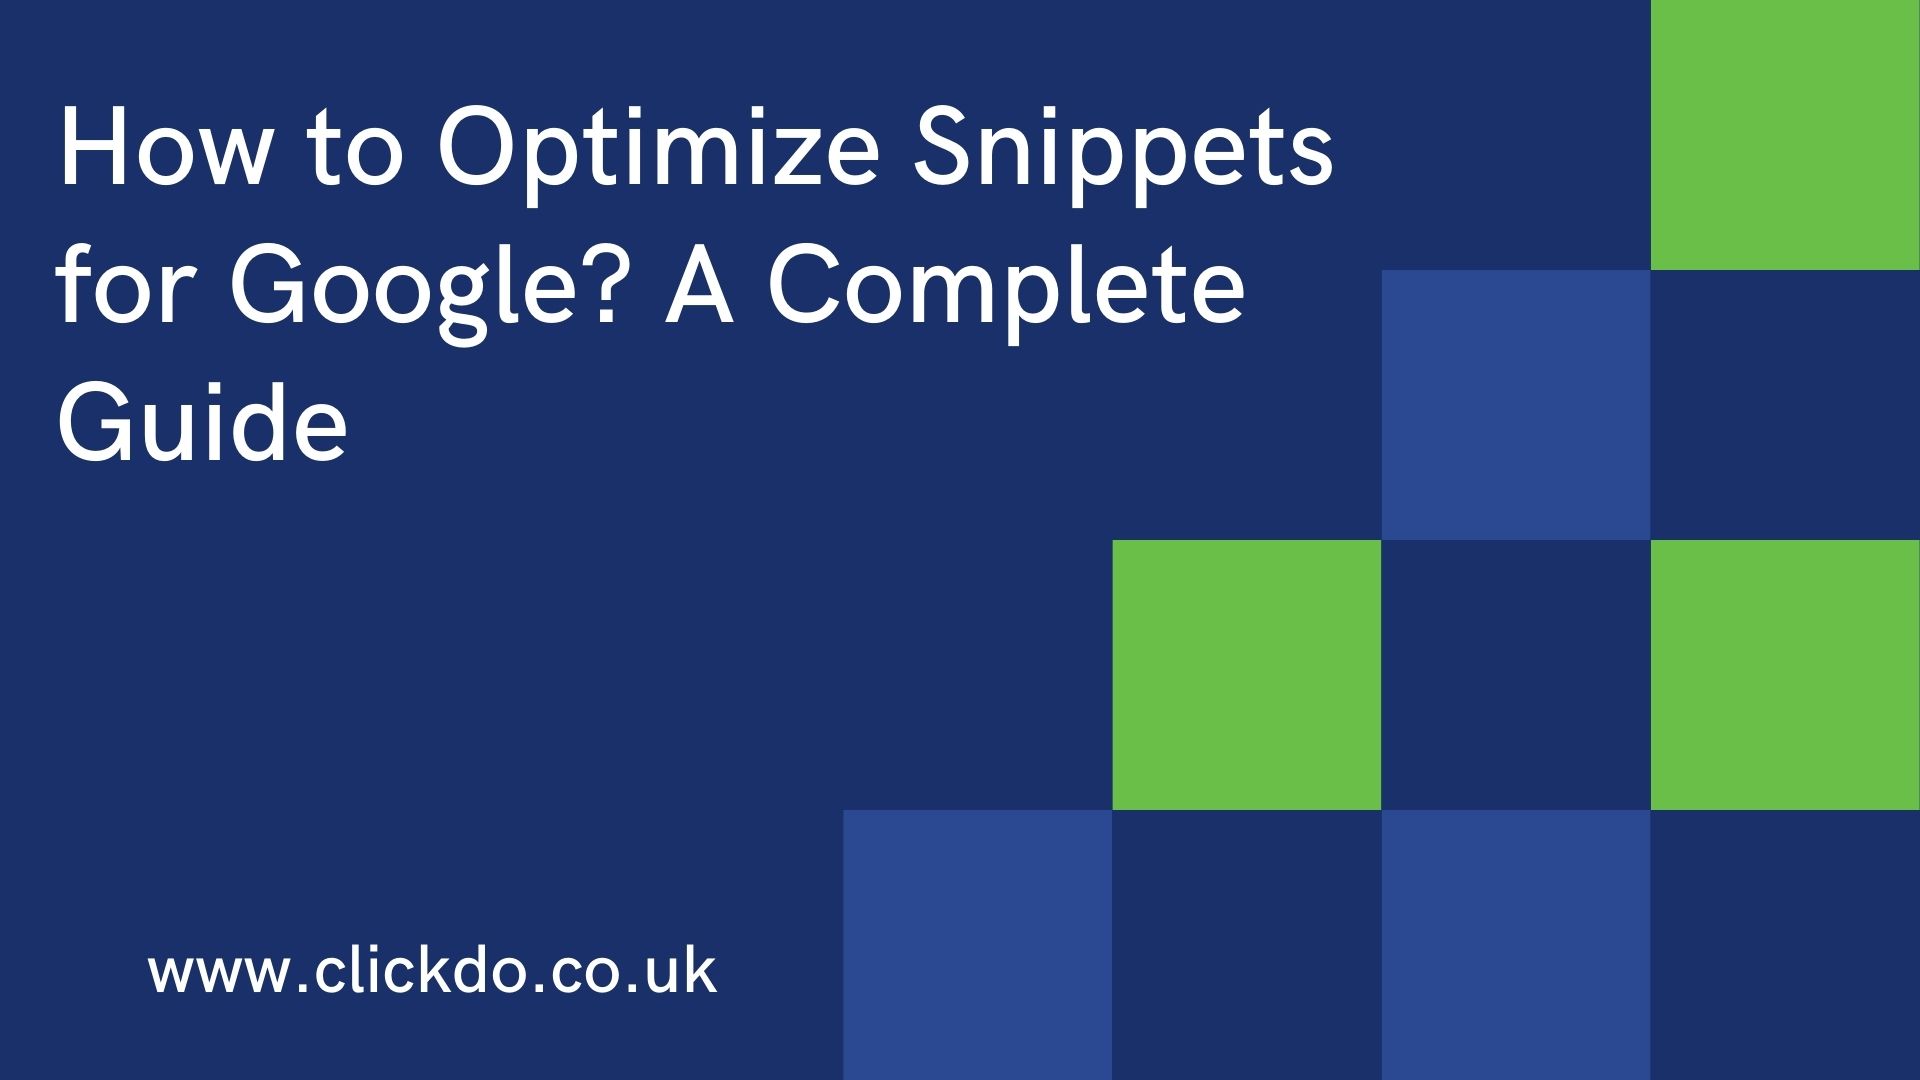 How to Optimize Snippets for Google?: A Complete Guide